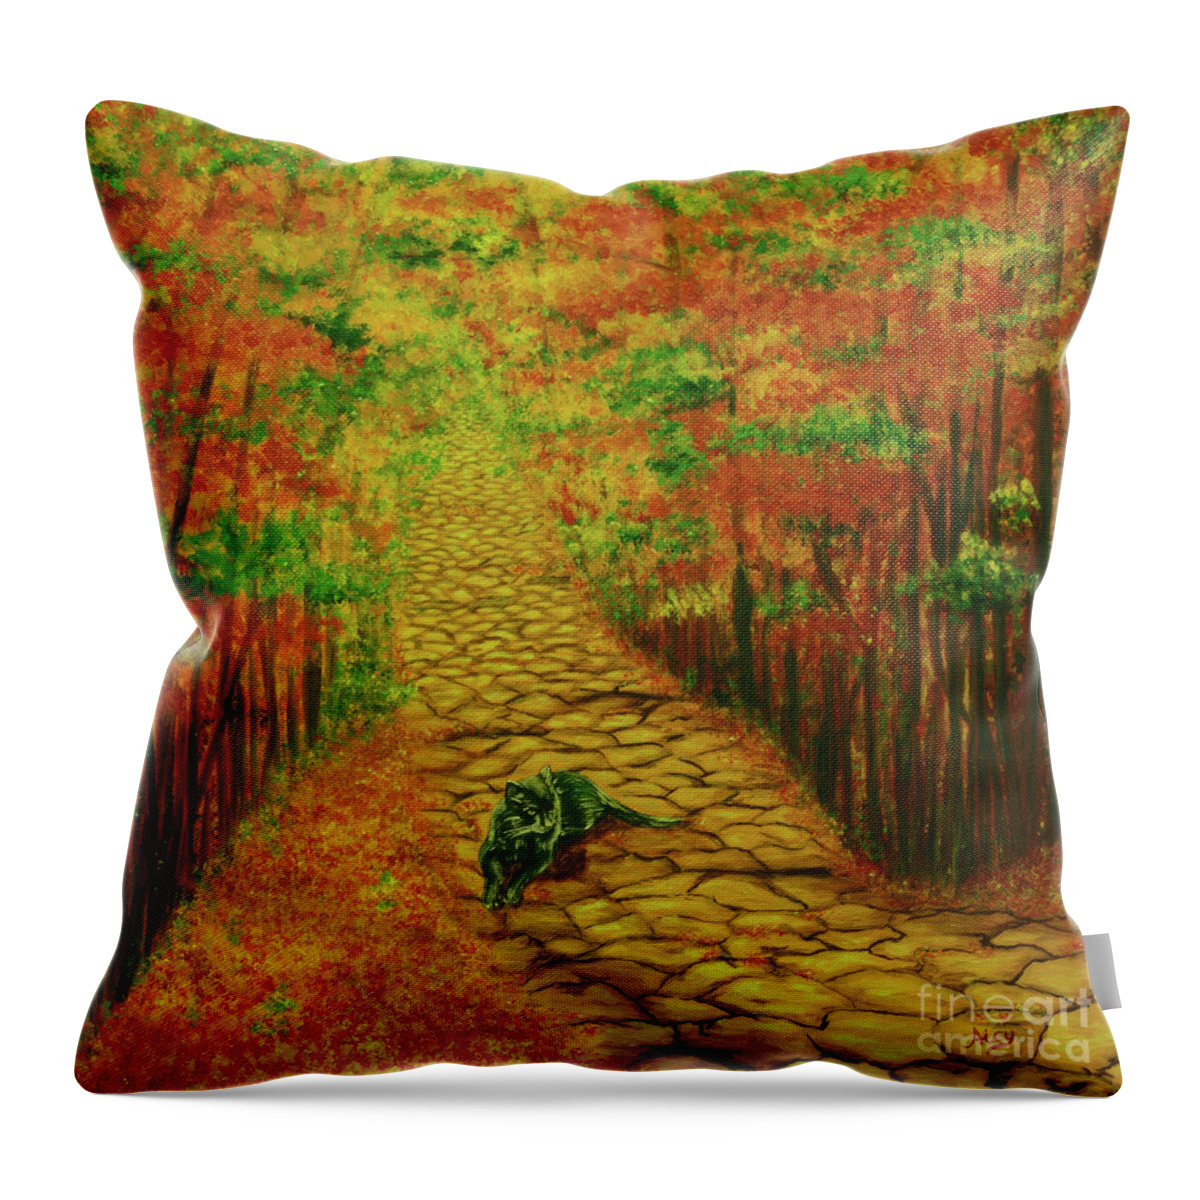 Cat Throw Pillow featuring the painting A Blissful Moment by Aicy Karbstein